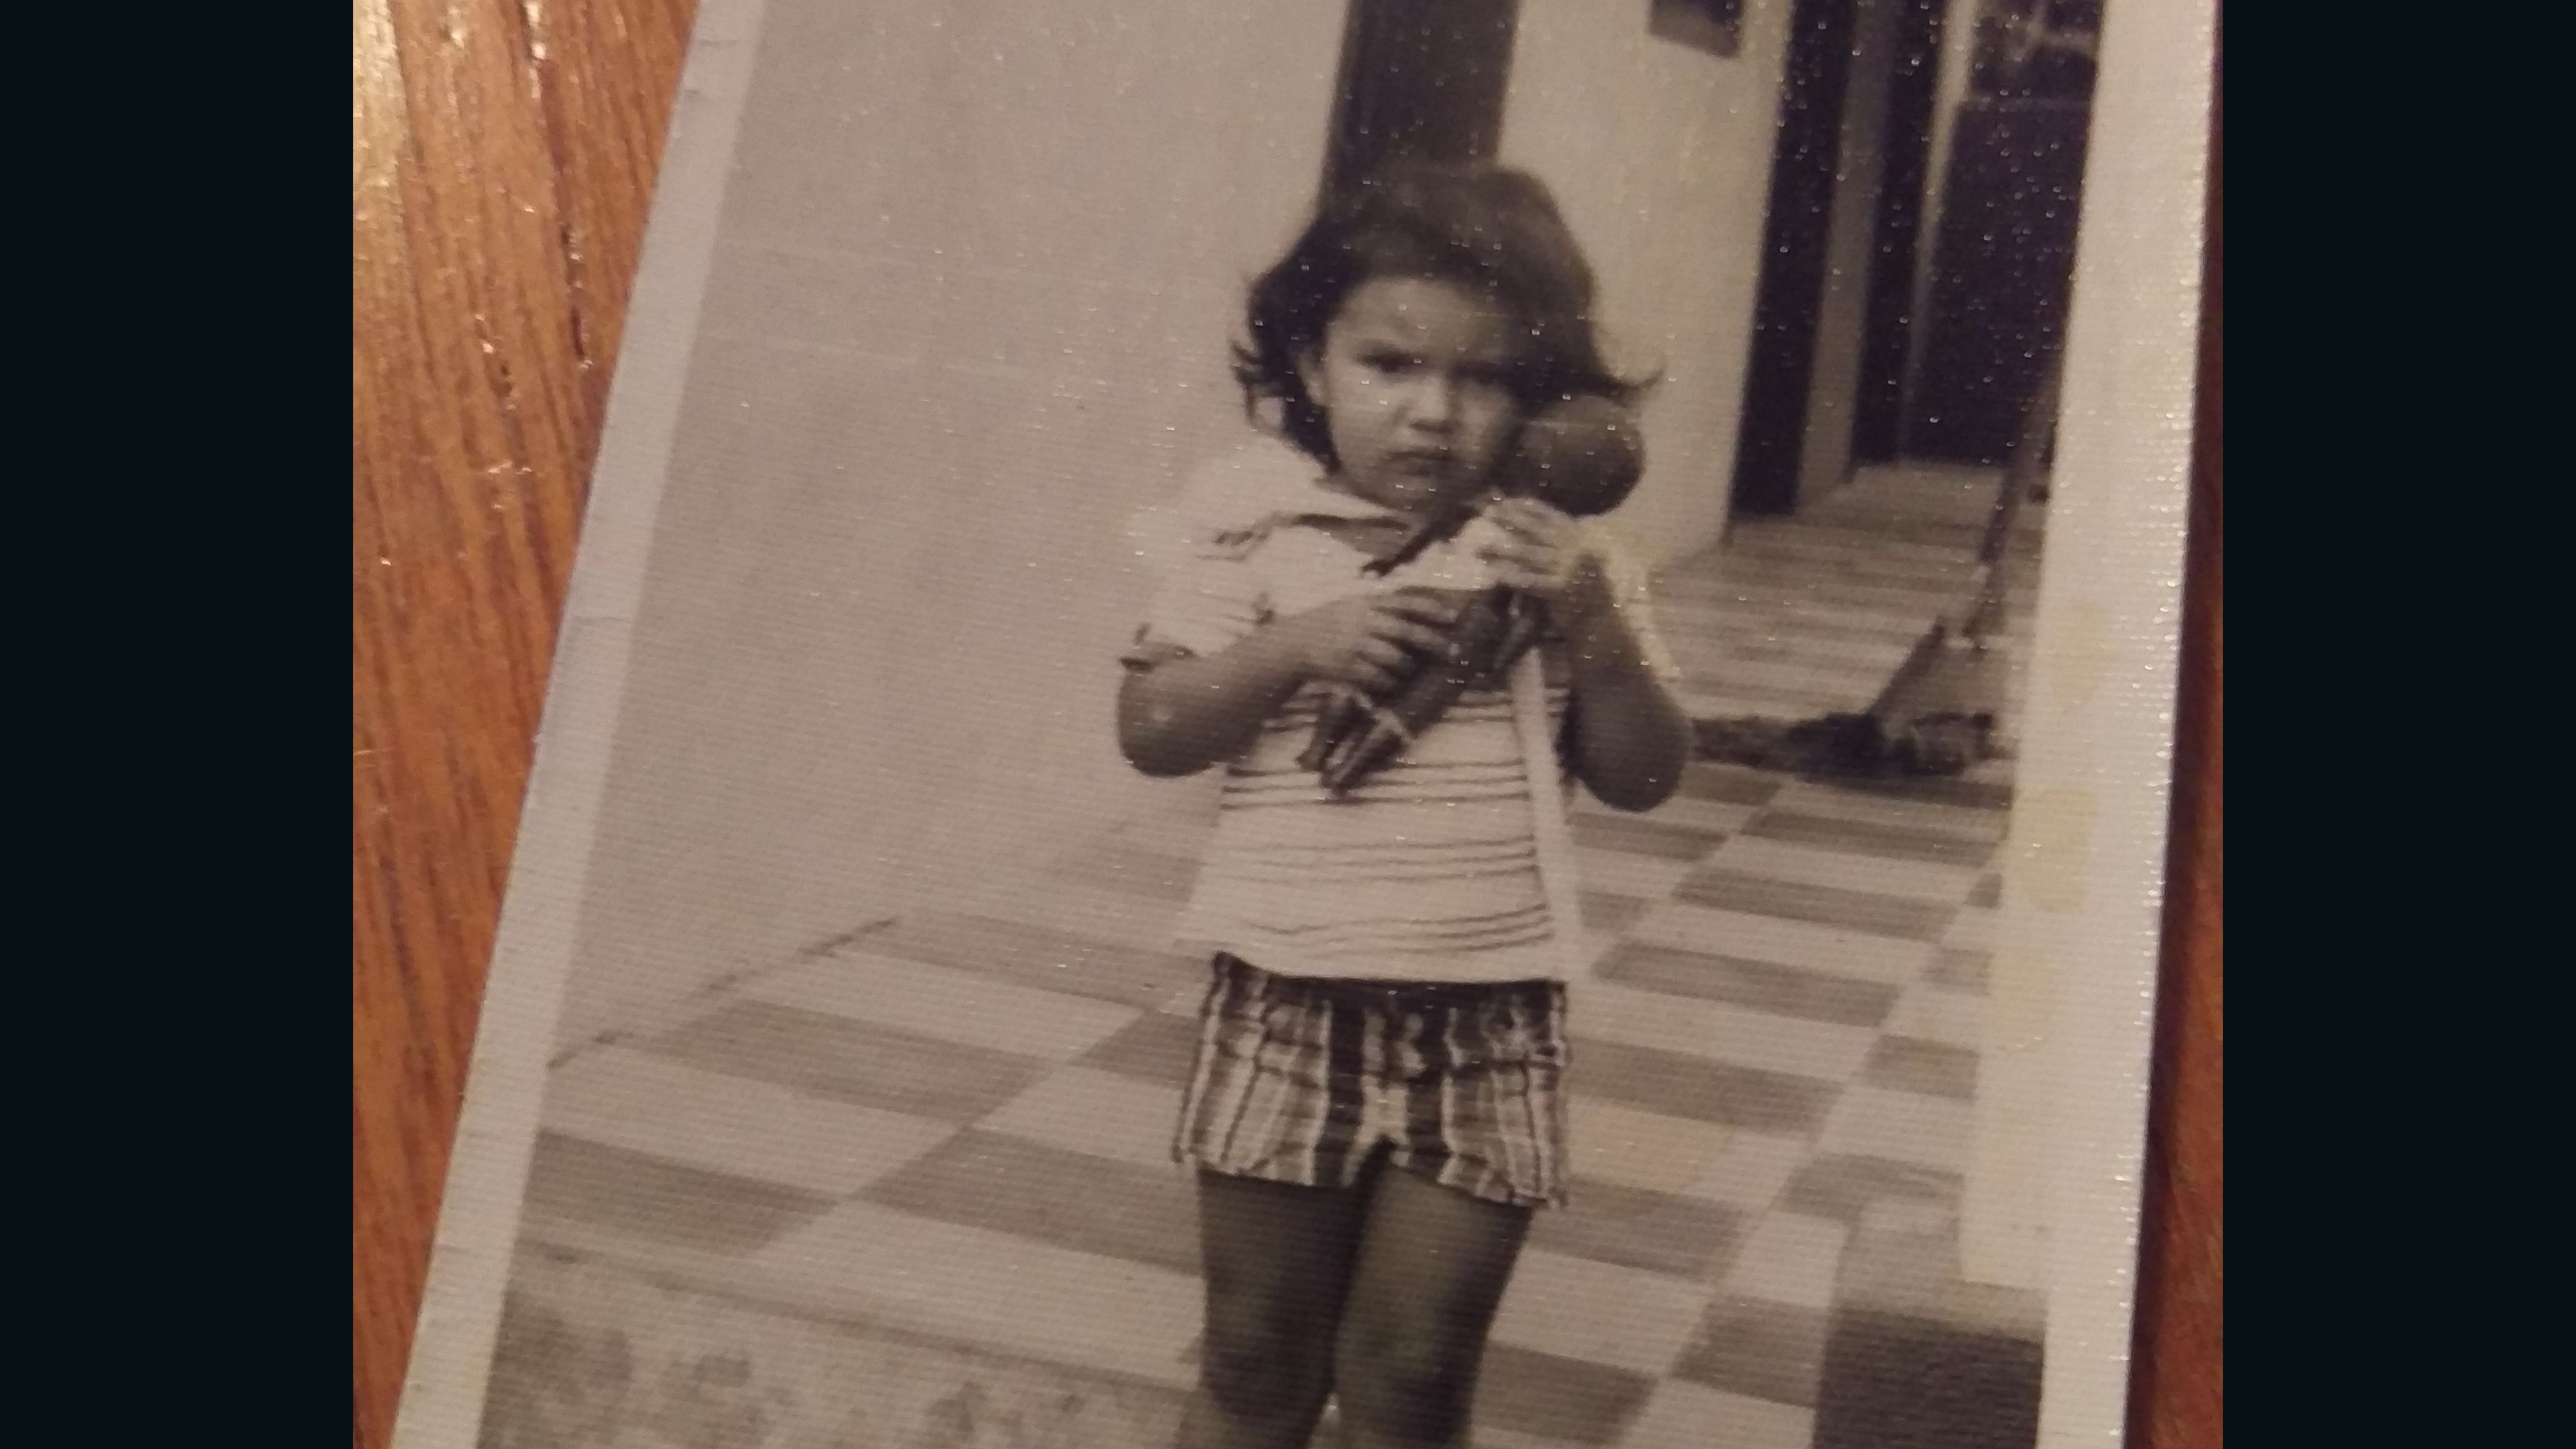 Berta Cáceres, pictured as a toddler in Honduras. Her nephew says she learned from a young age to care about less fortunate people. 